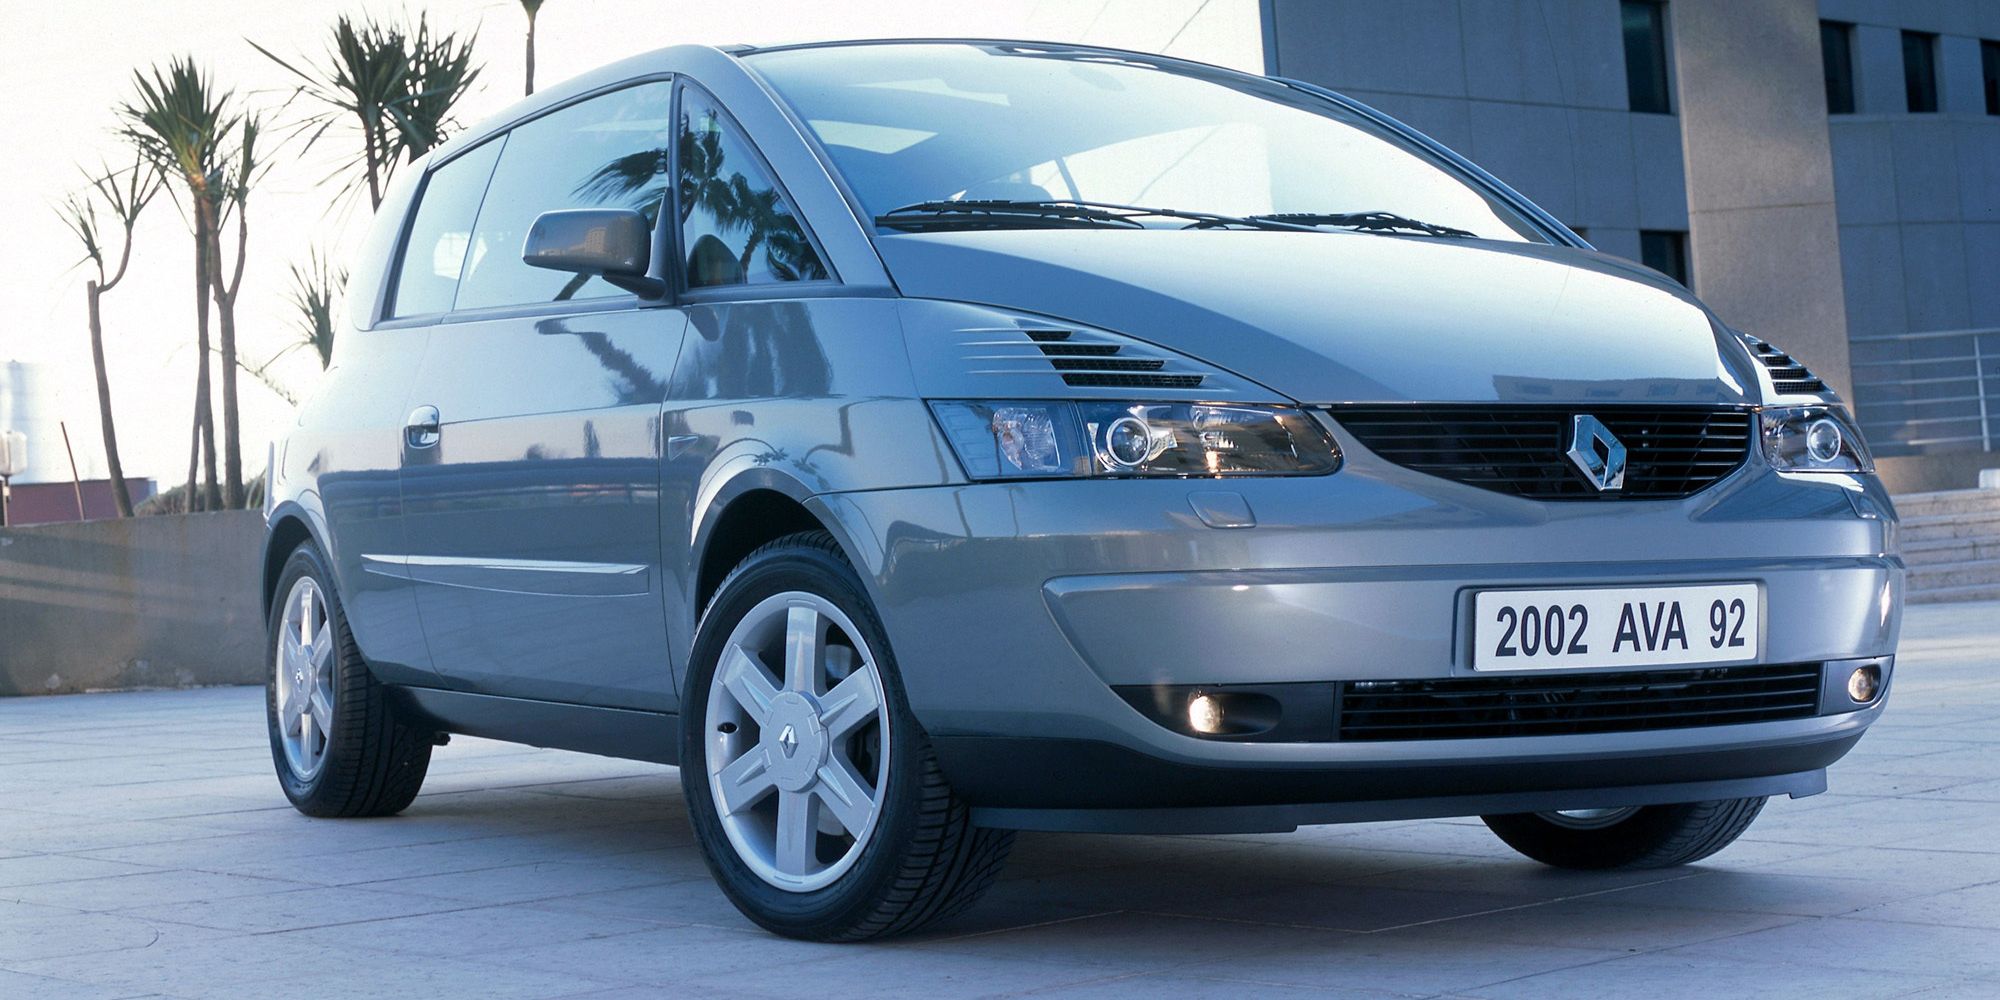 The front of the Renault Avantime